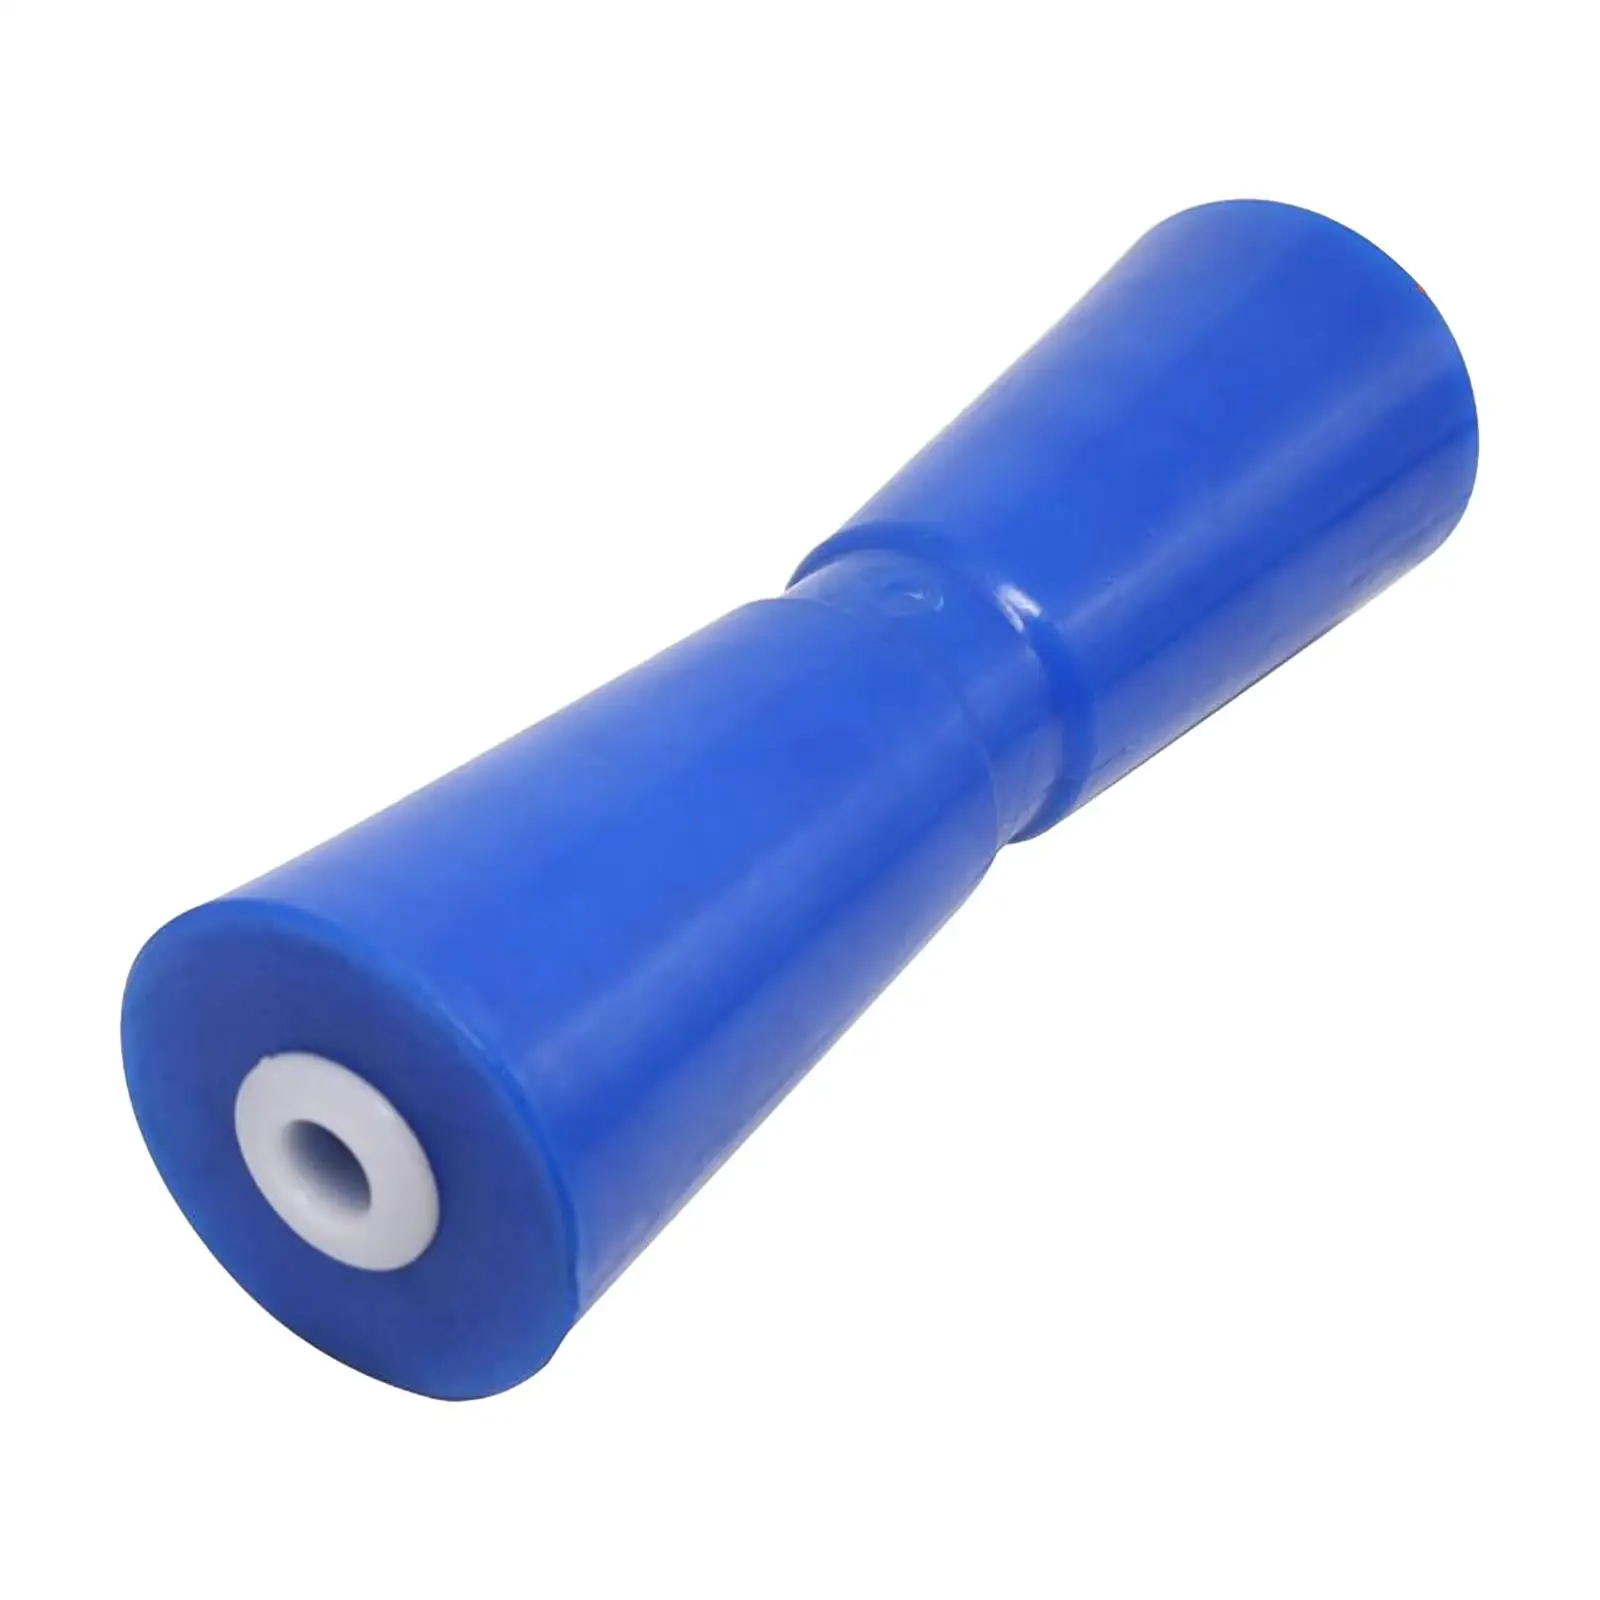 Boat Trailer Bow Roller Roll Smoothly Blue Heavy Duty Rolling Tool for Ship Parts High Performance Replacement Professional